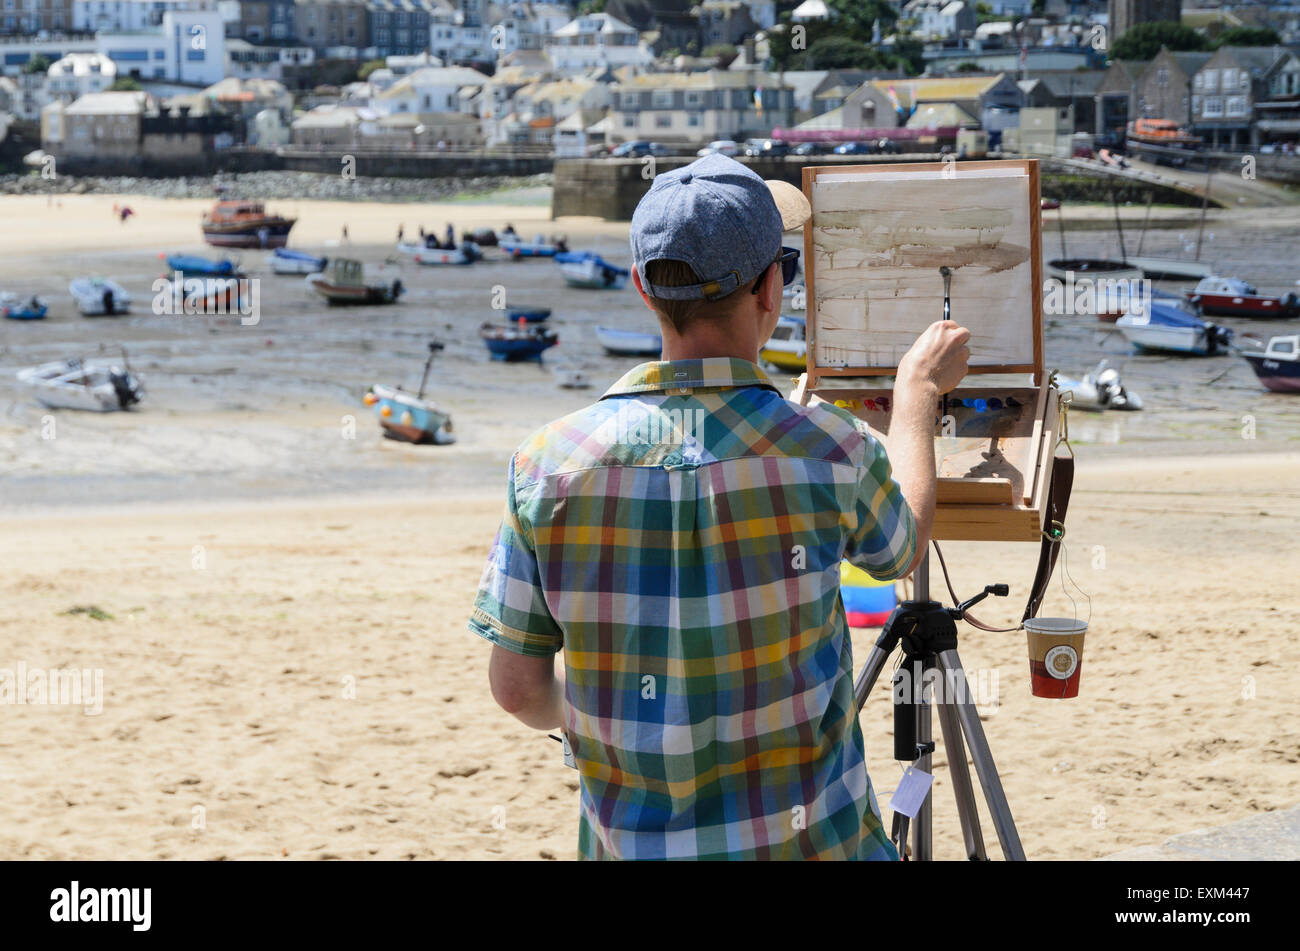 An artist painting in the open air at the Harbour, St Ives, Cornwall, England, U.K. Stock Photo